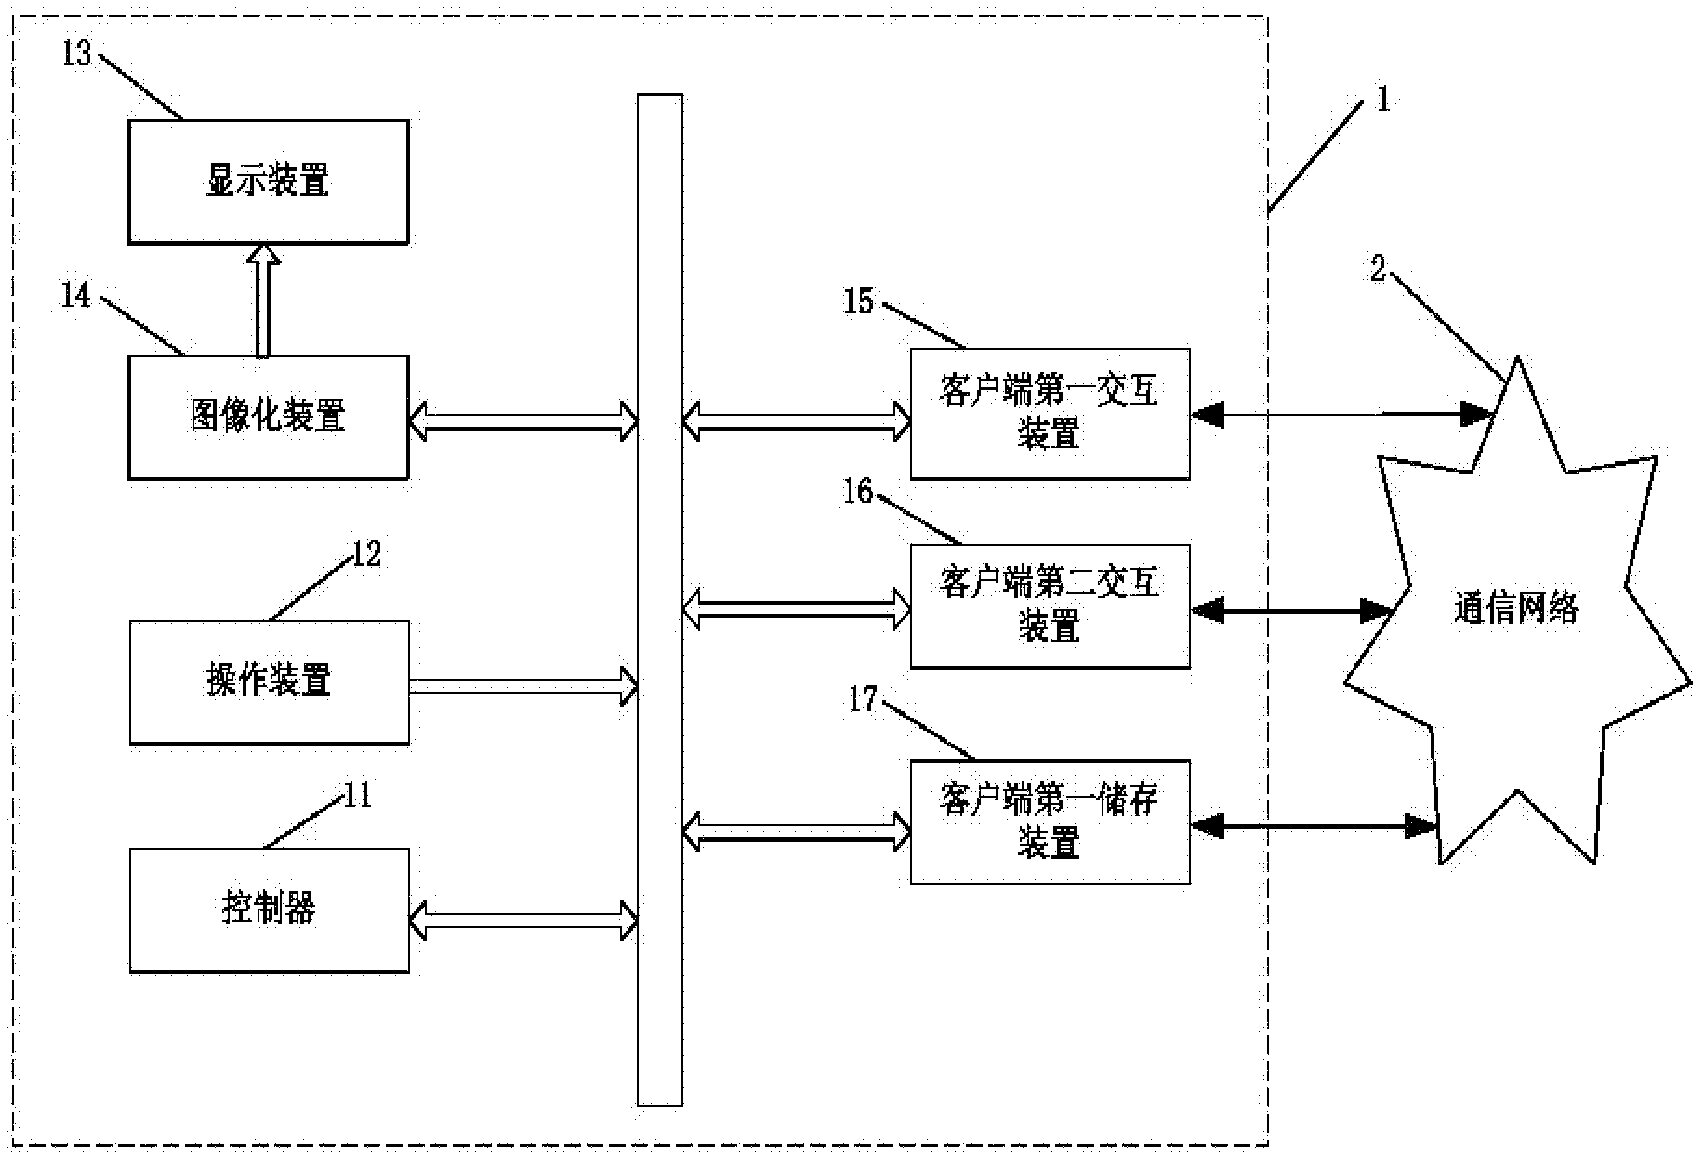 Online game device and method